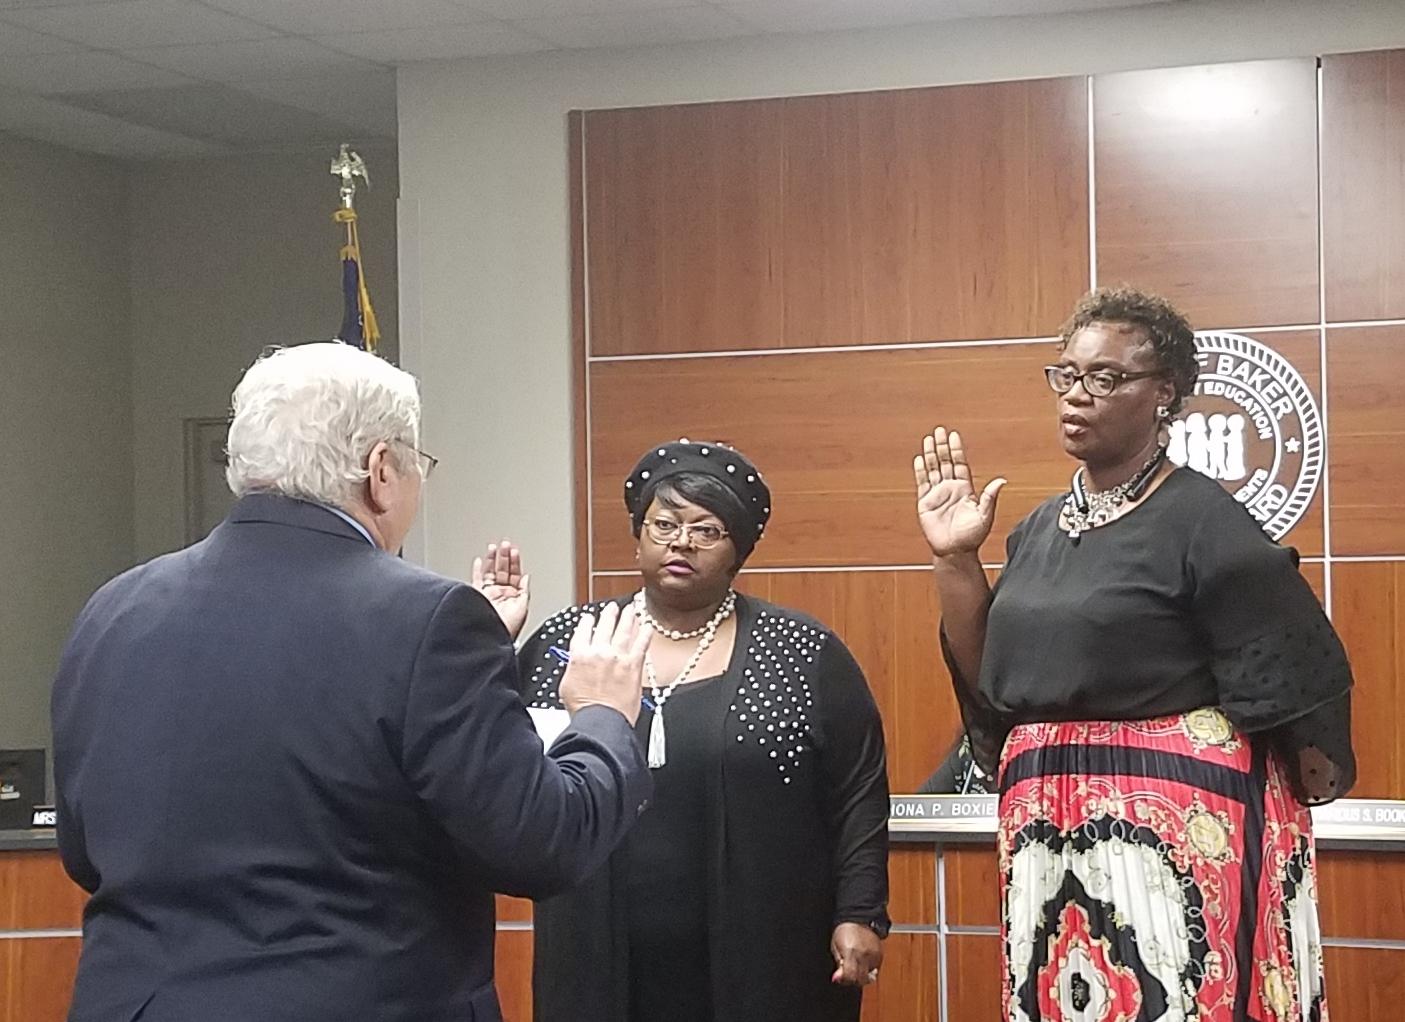 Photo of Baker School Board Officers being sworn in for leadership during the 2020 school year